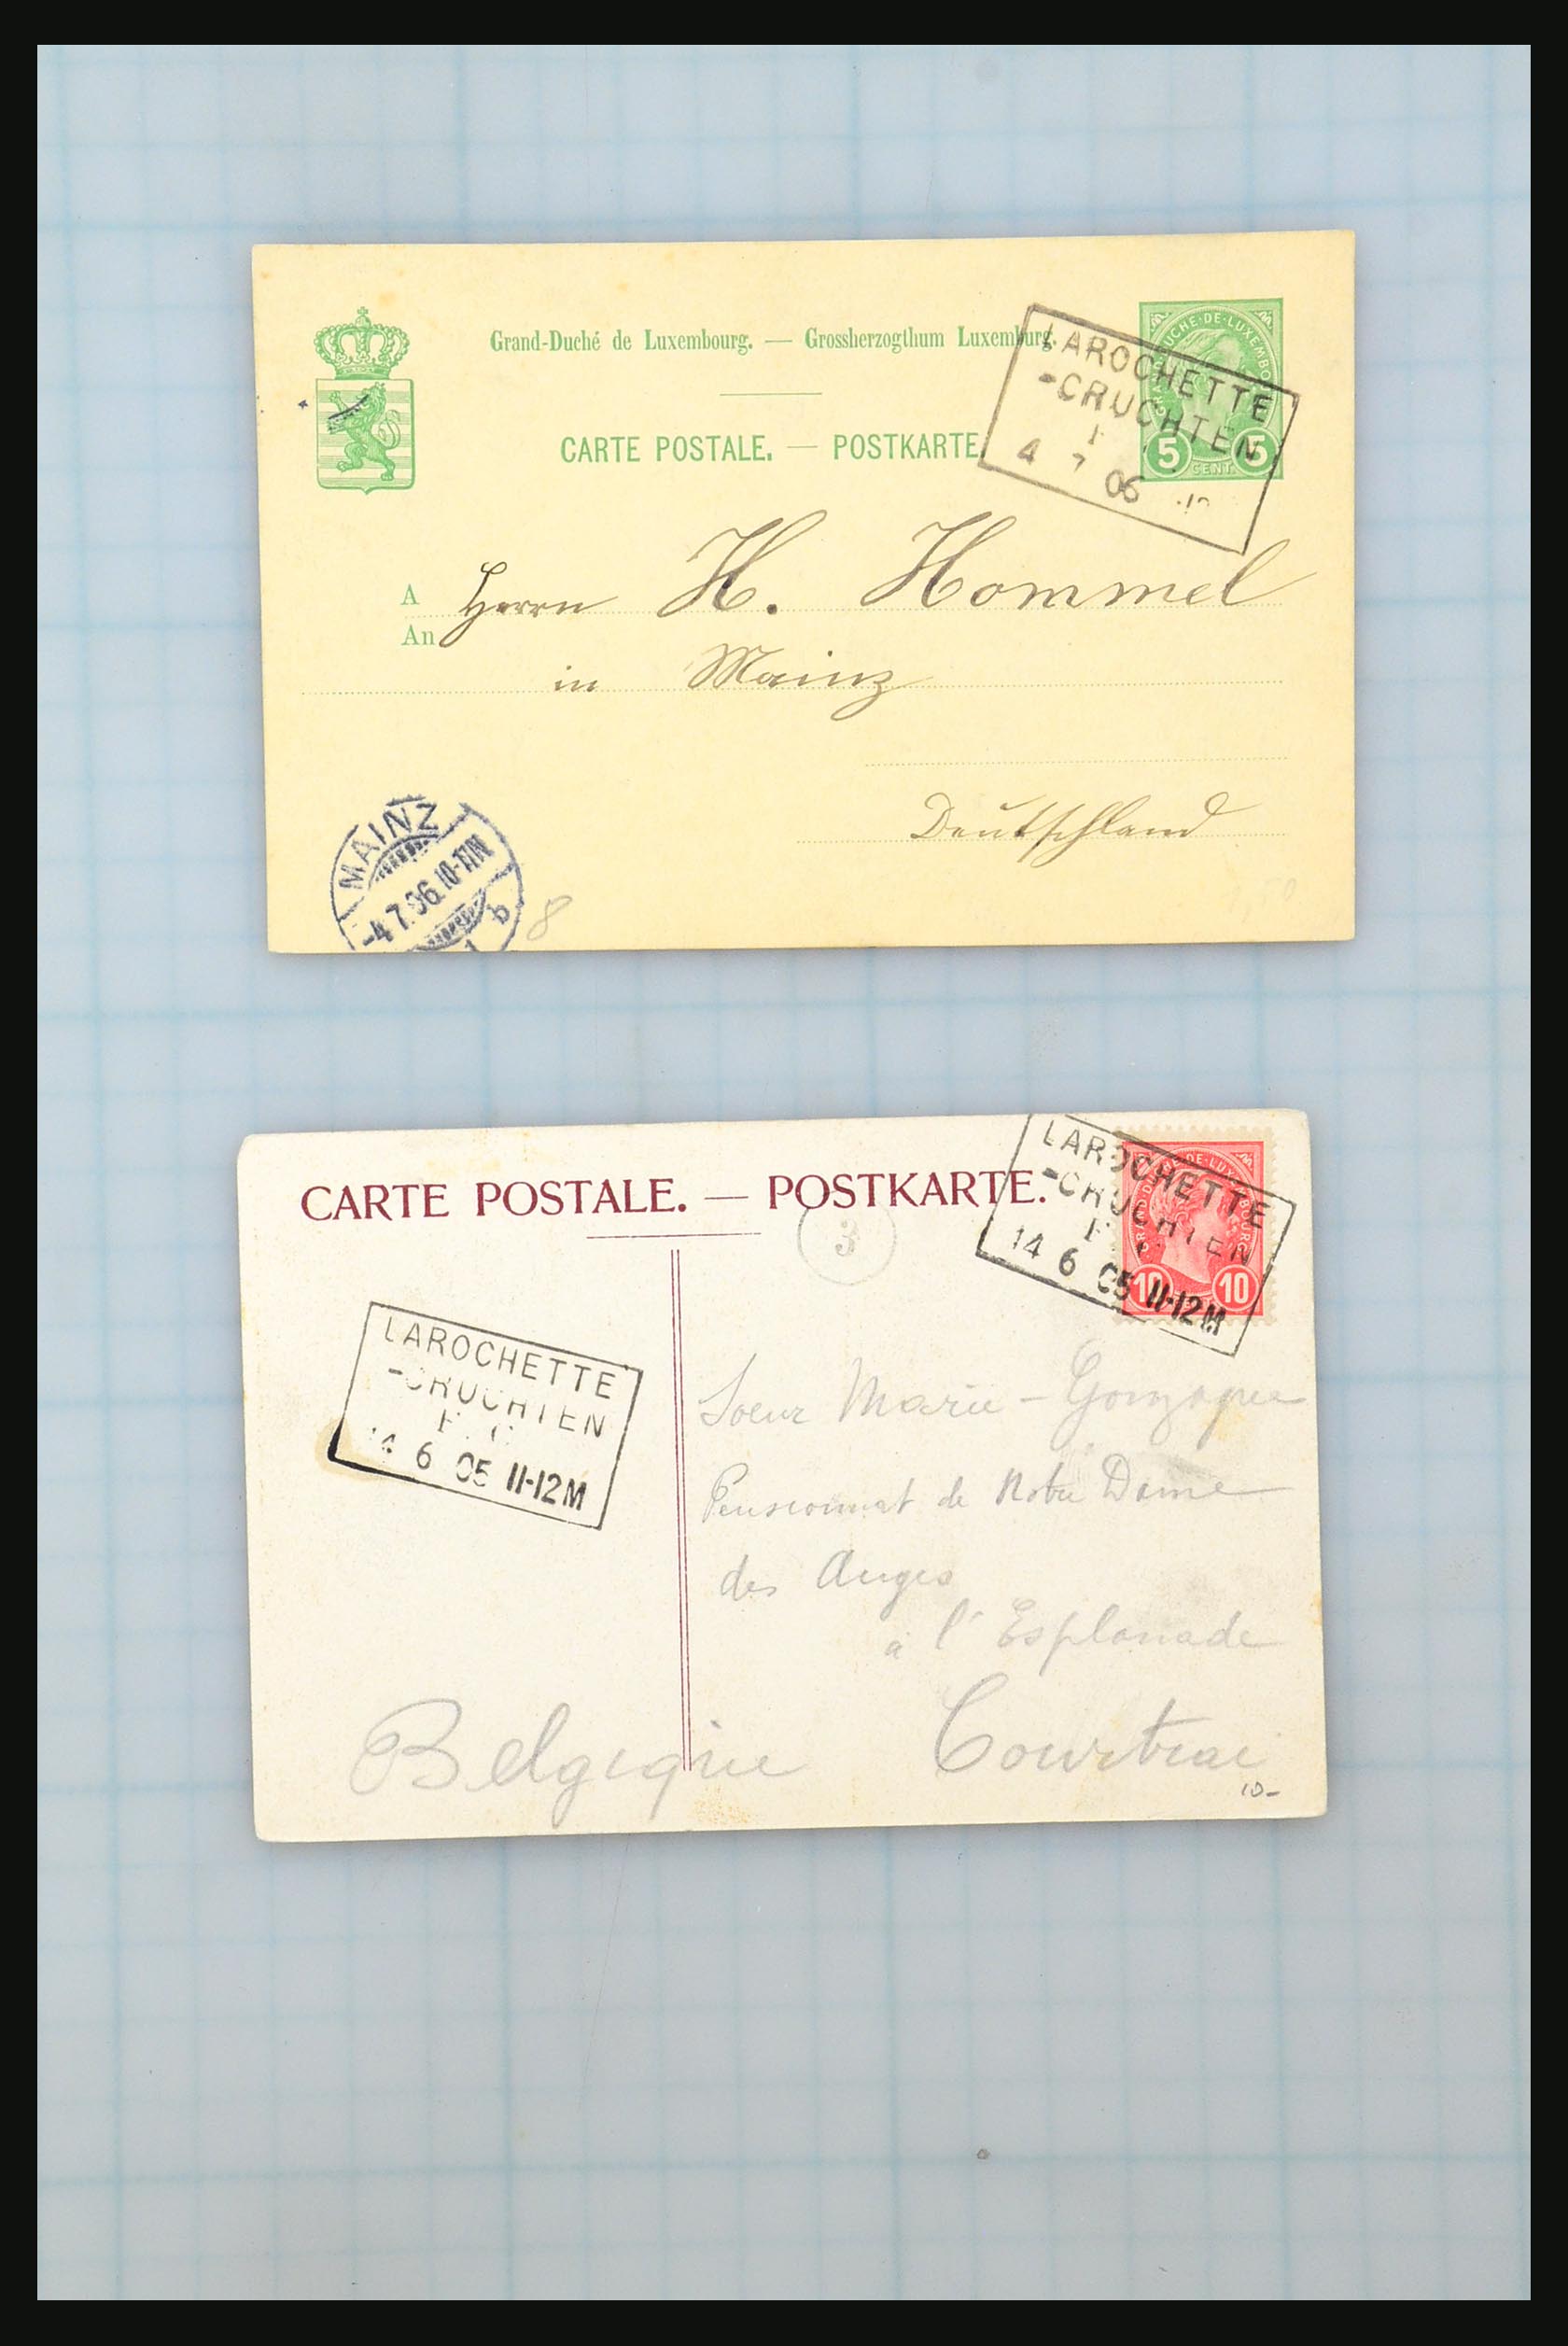 31358 083 - 31358 Portugal/Luxemburg/Greece covers 1880-1960.